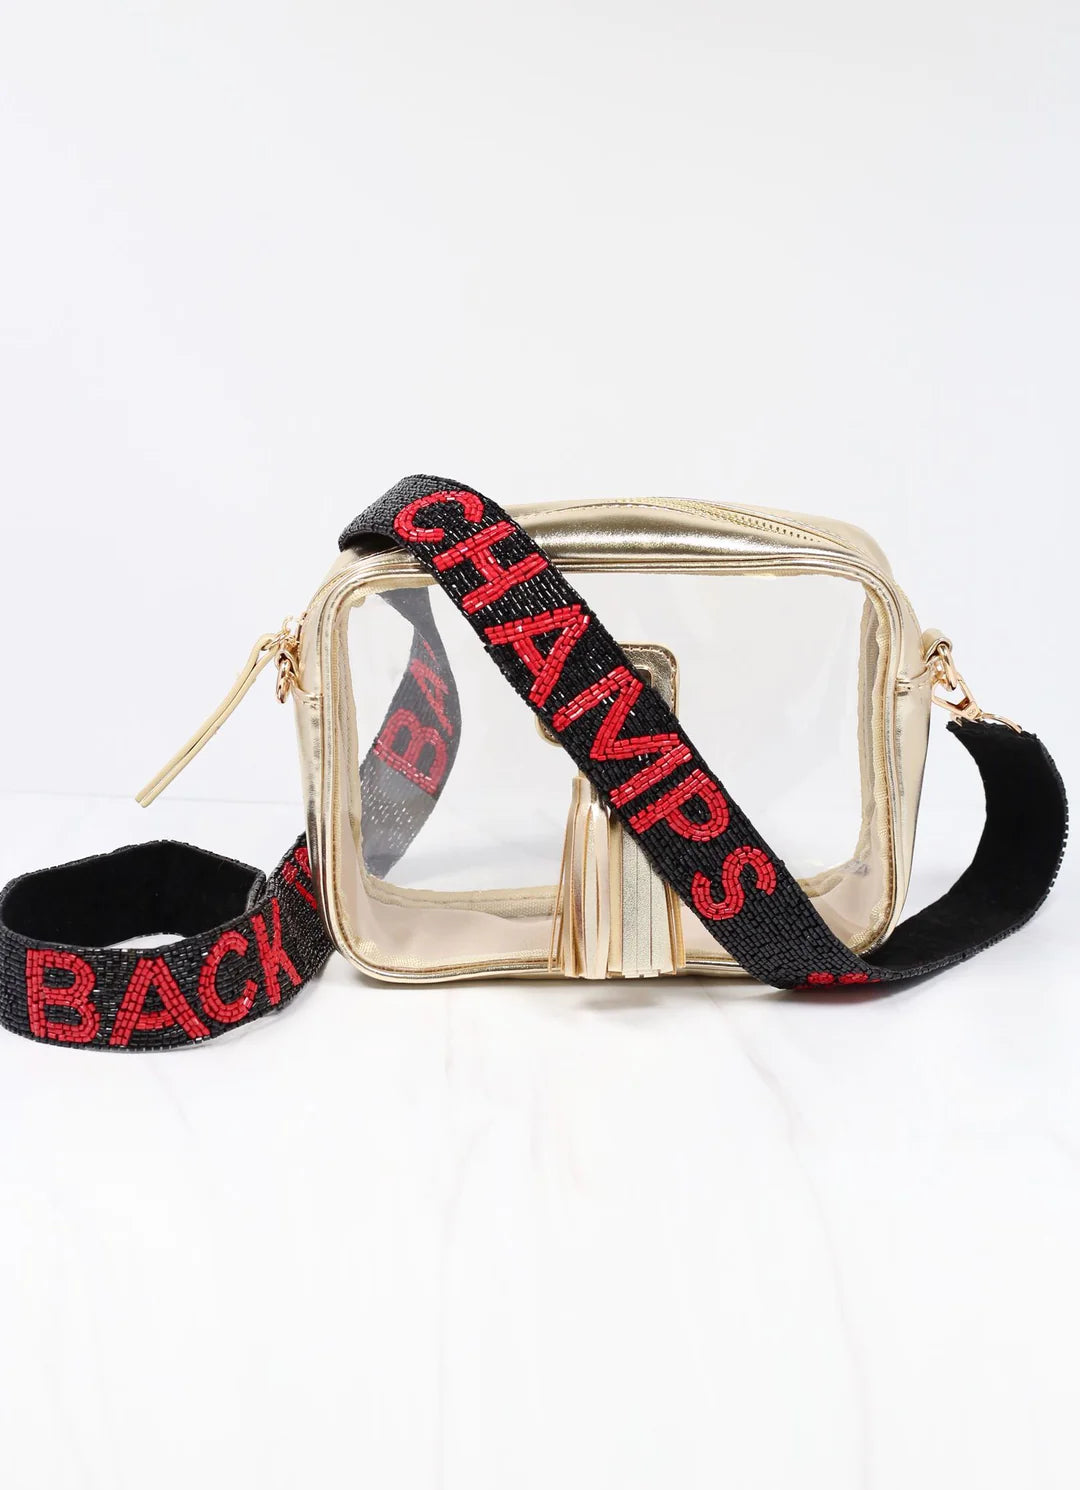 Back to Back Champs Beaded Strap